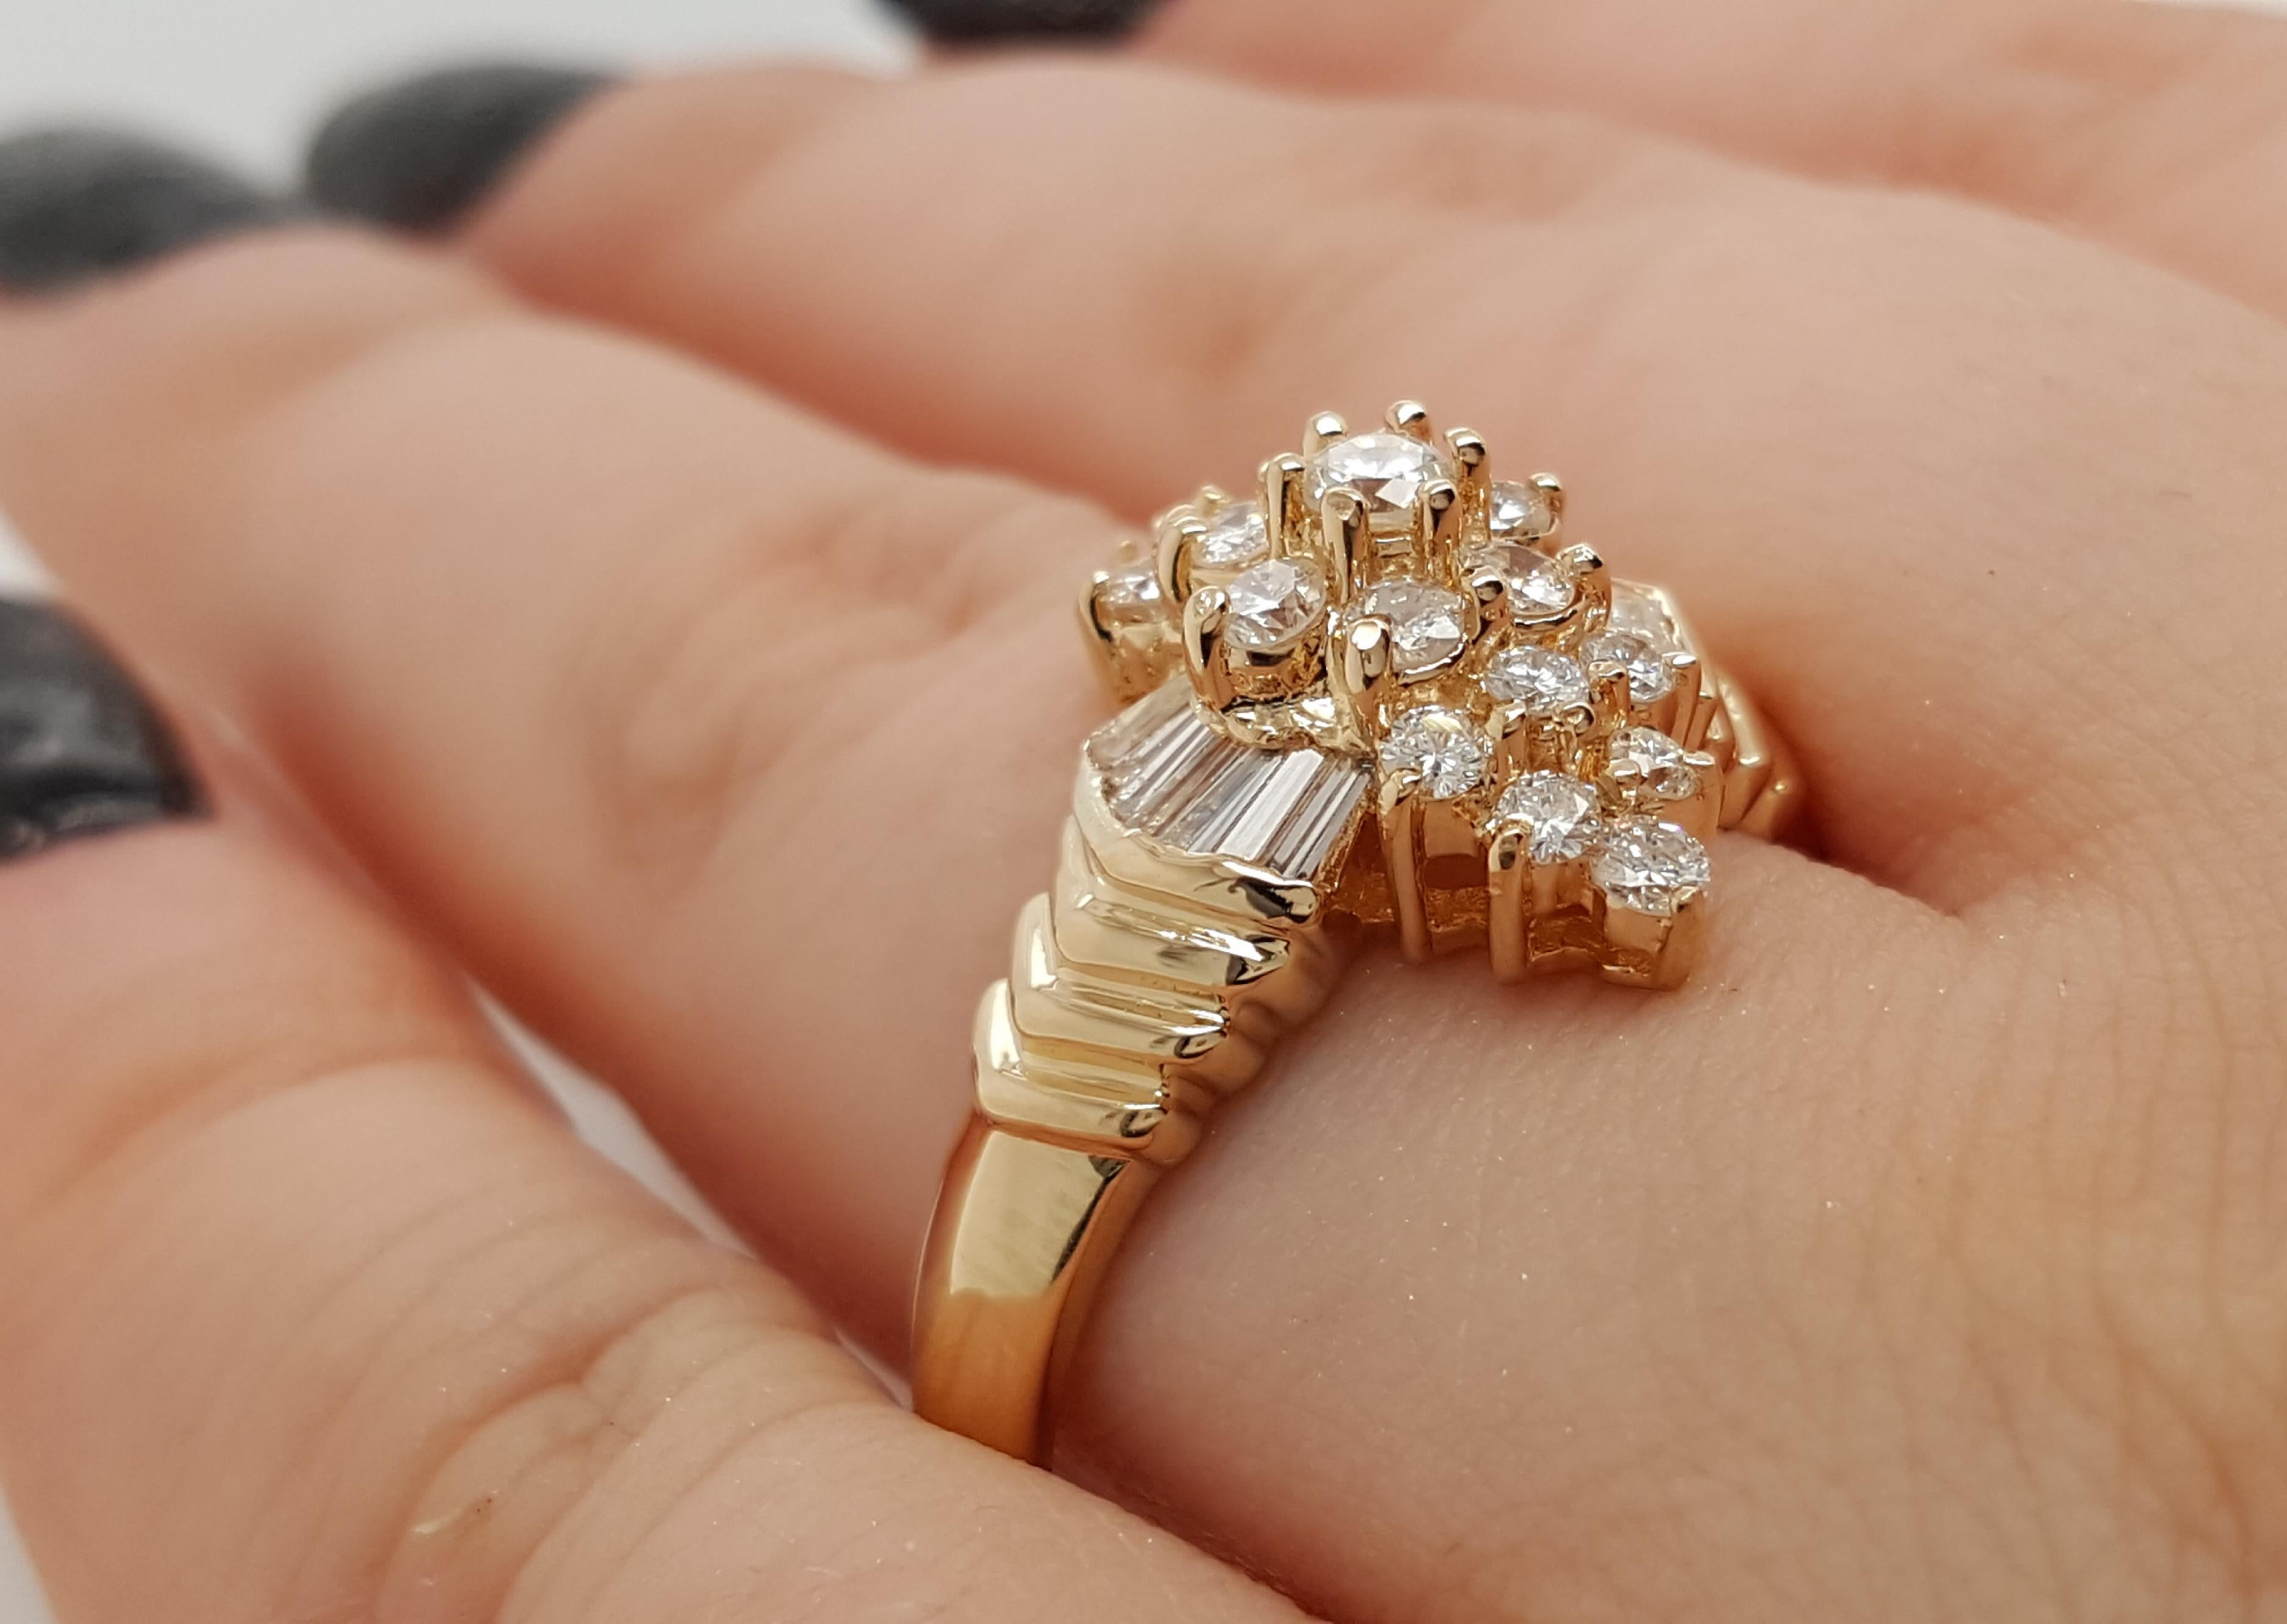 1.5 Carat Diamond Cocktail Ring Set in 18 Karat Yellow Gold In Good Condition For Sale In Addison, TX